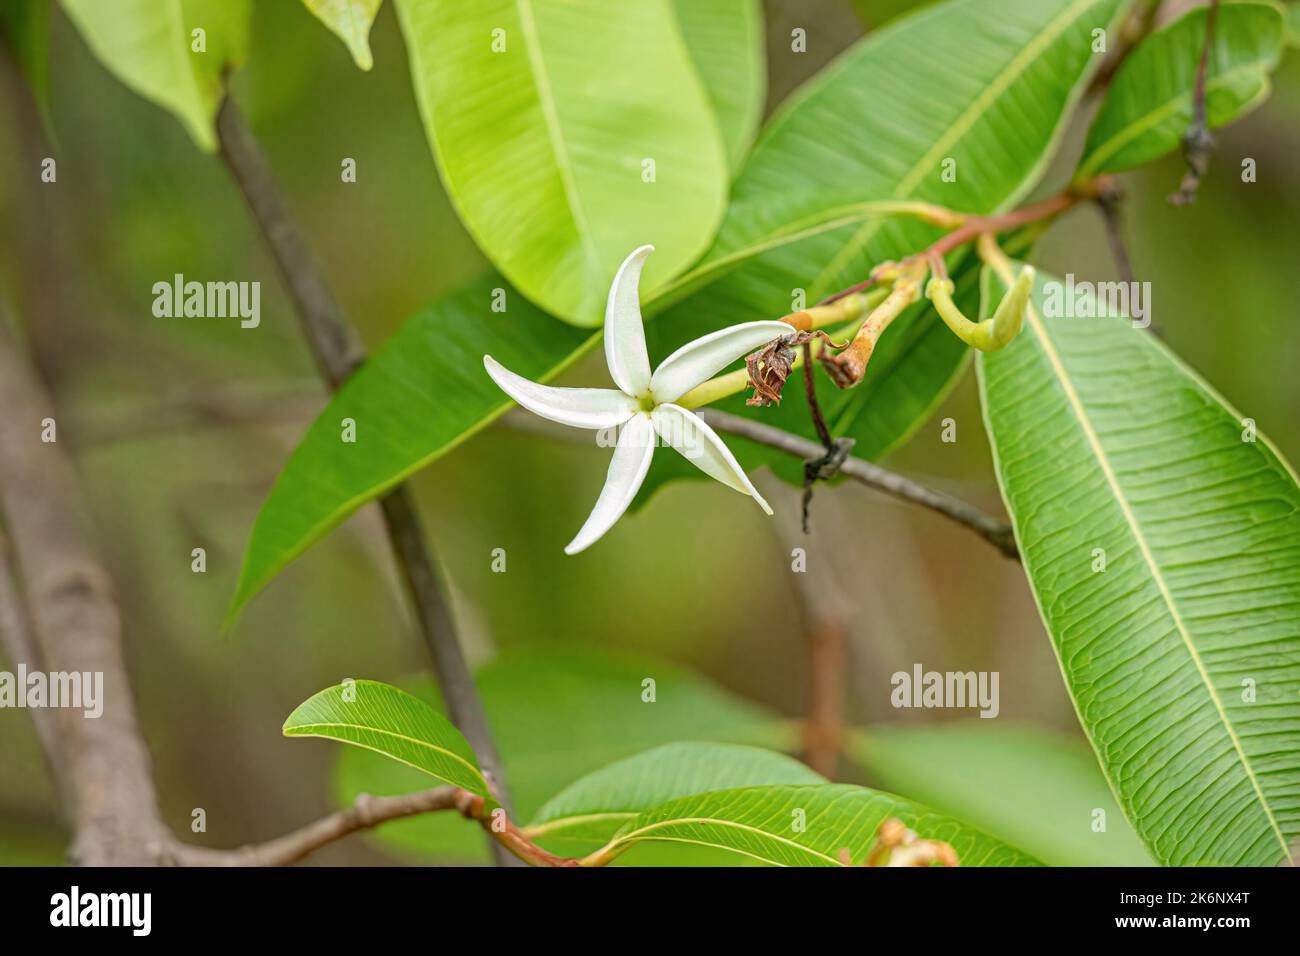 flower of the Tree called Mangaba of the species Hancornia speciosa with selective focus Stock Photo